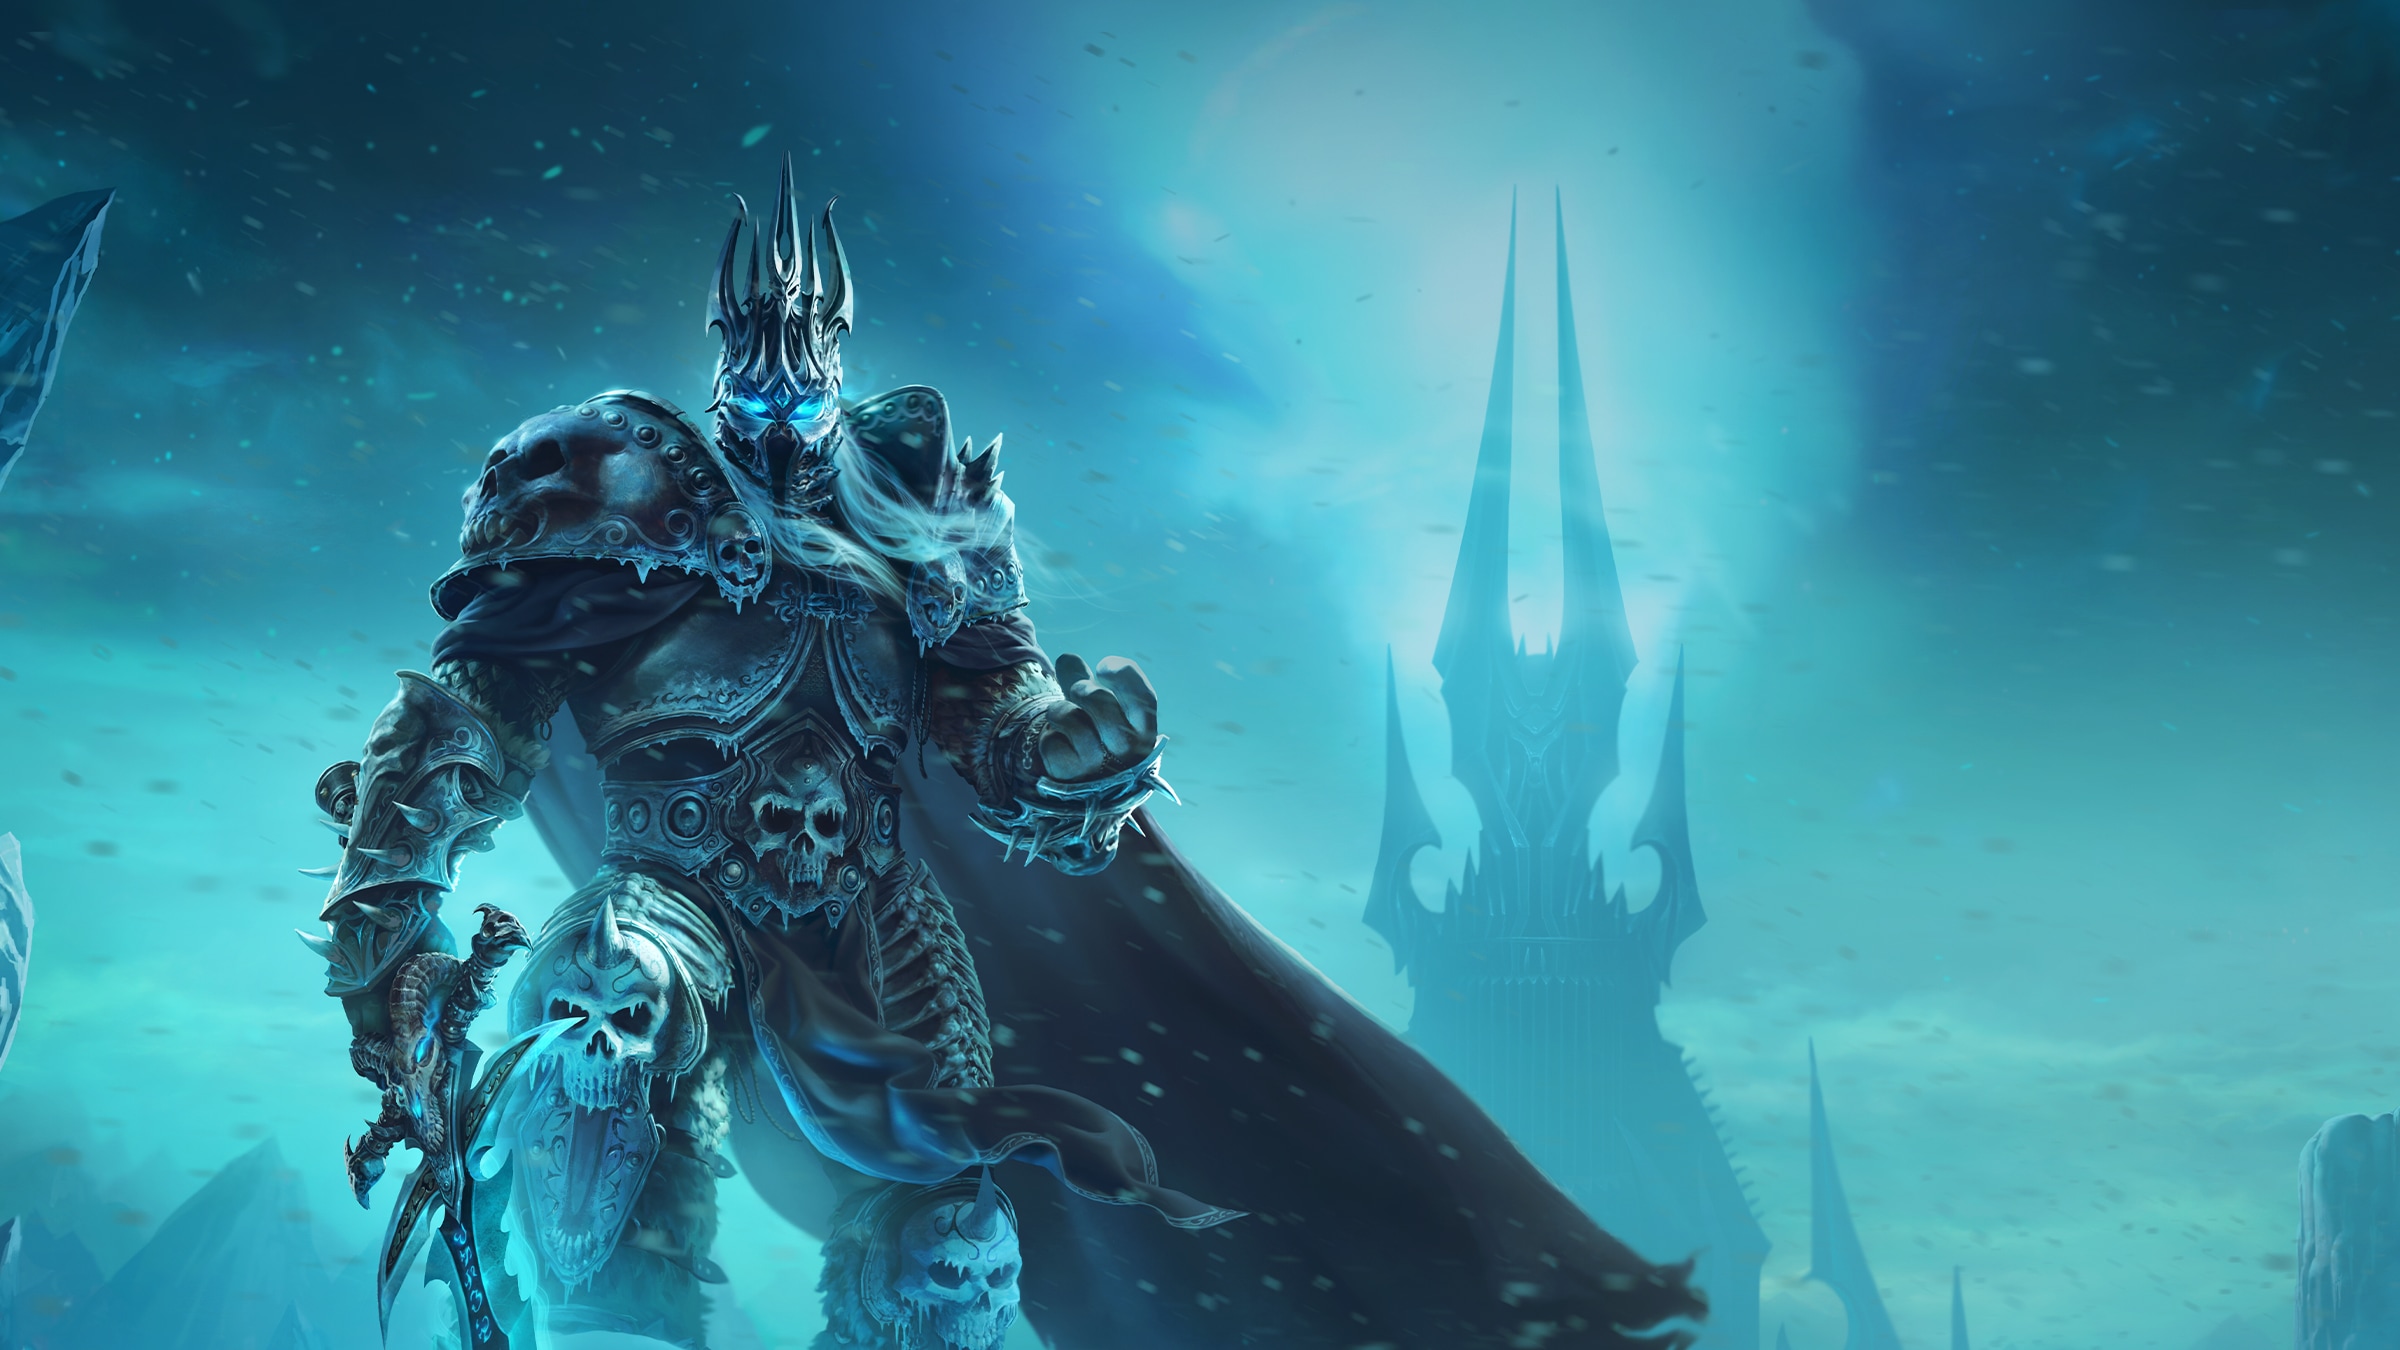 The Wrath of the Lich King Classic™ Pre-Patch Goes Live August 30